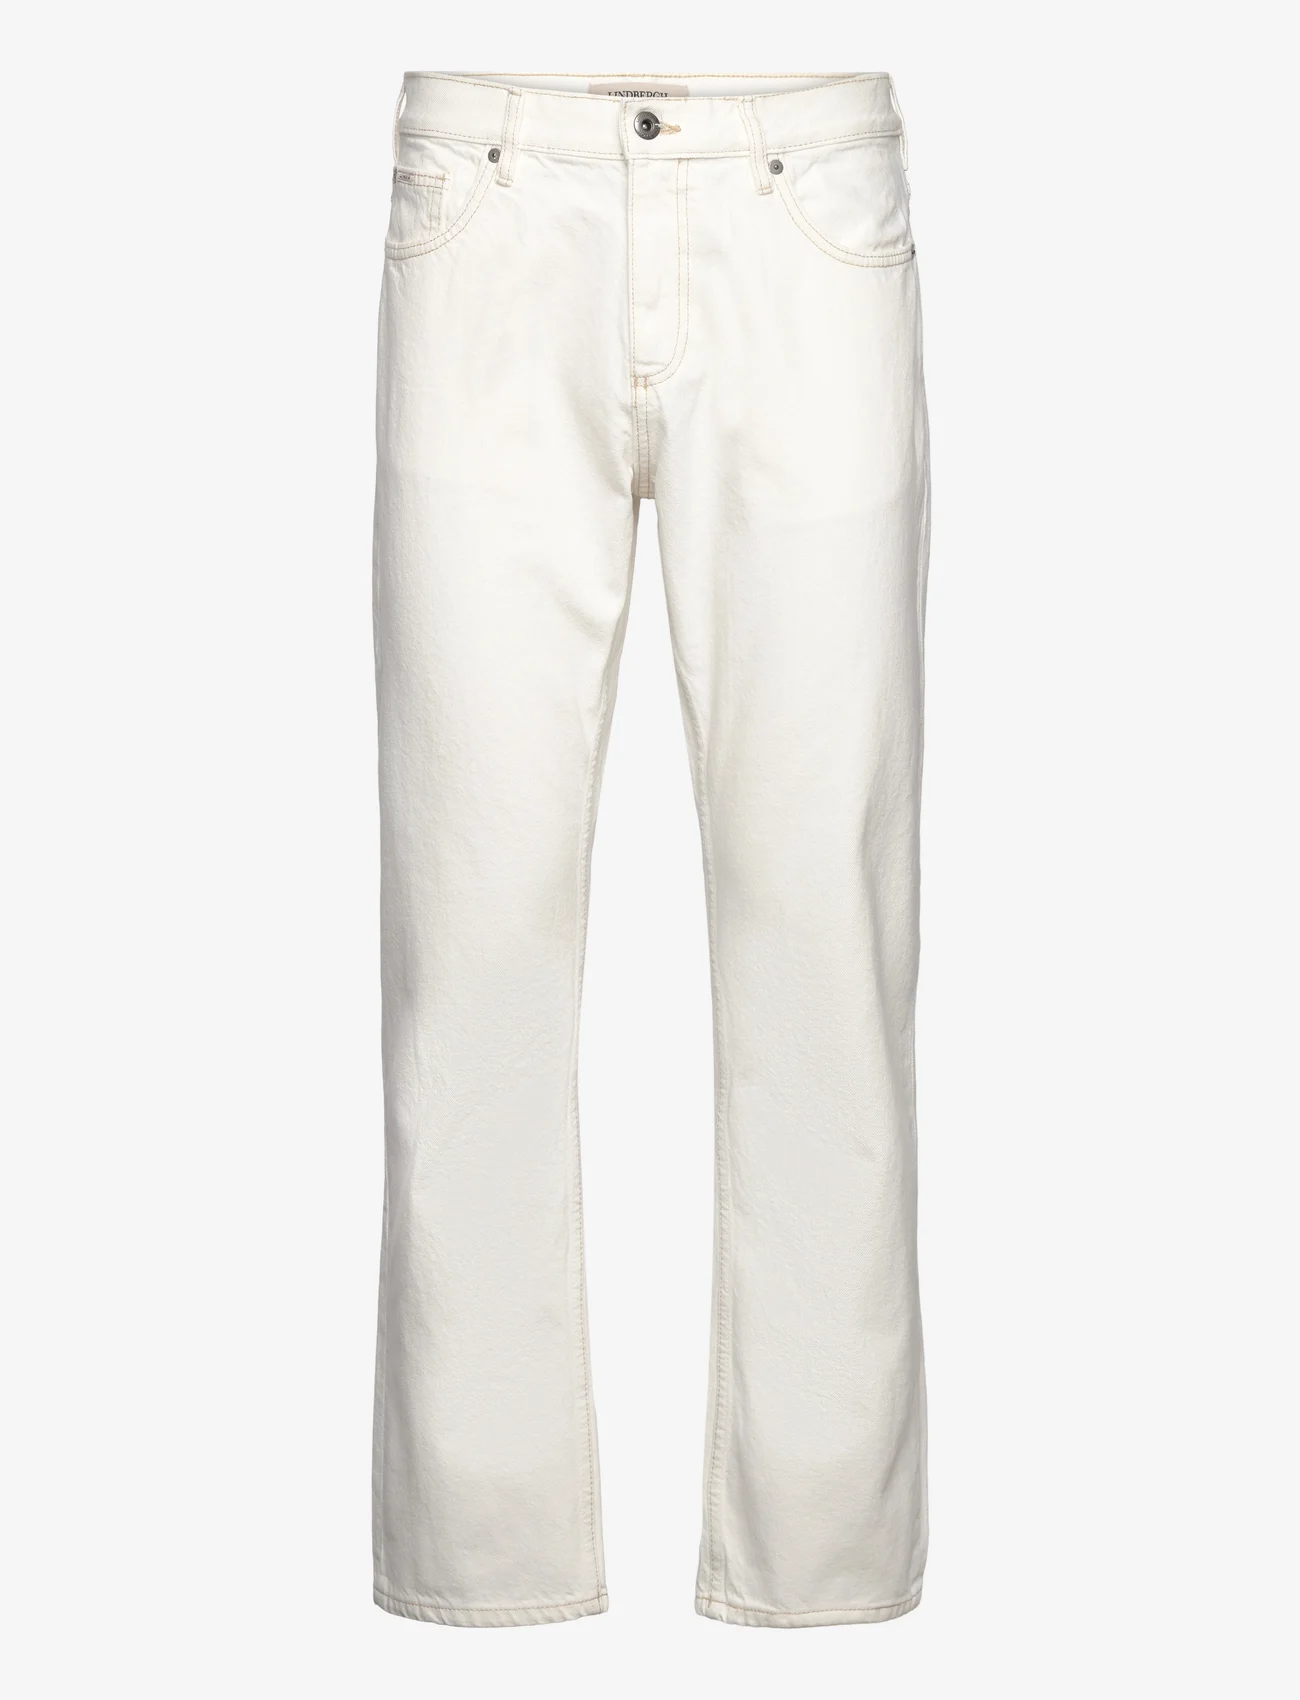 Lindbergh - Loose fit jeans - loose jeans - off white - 0